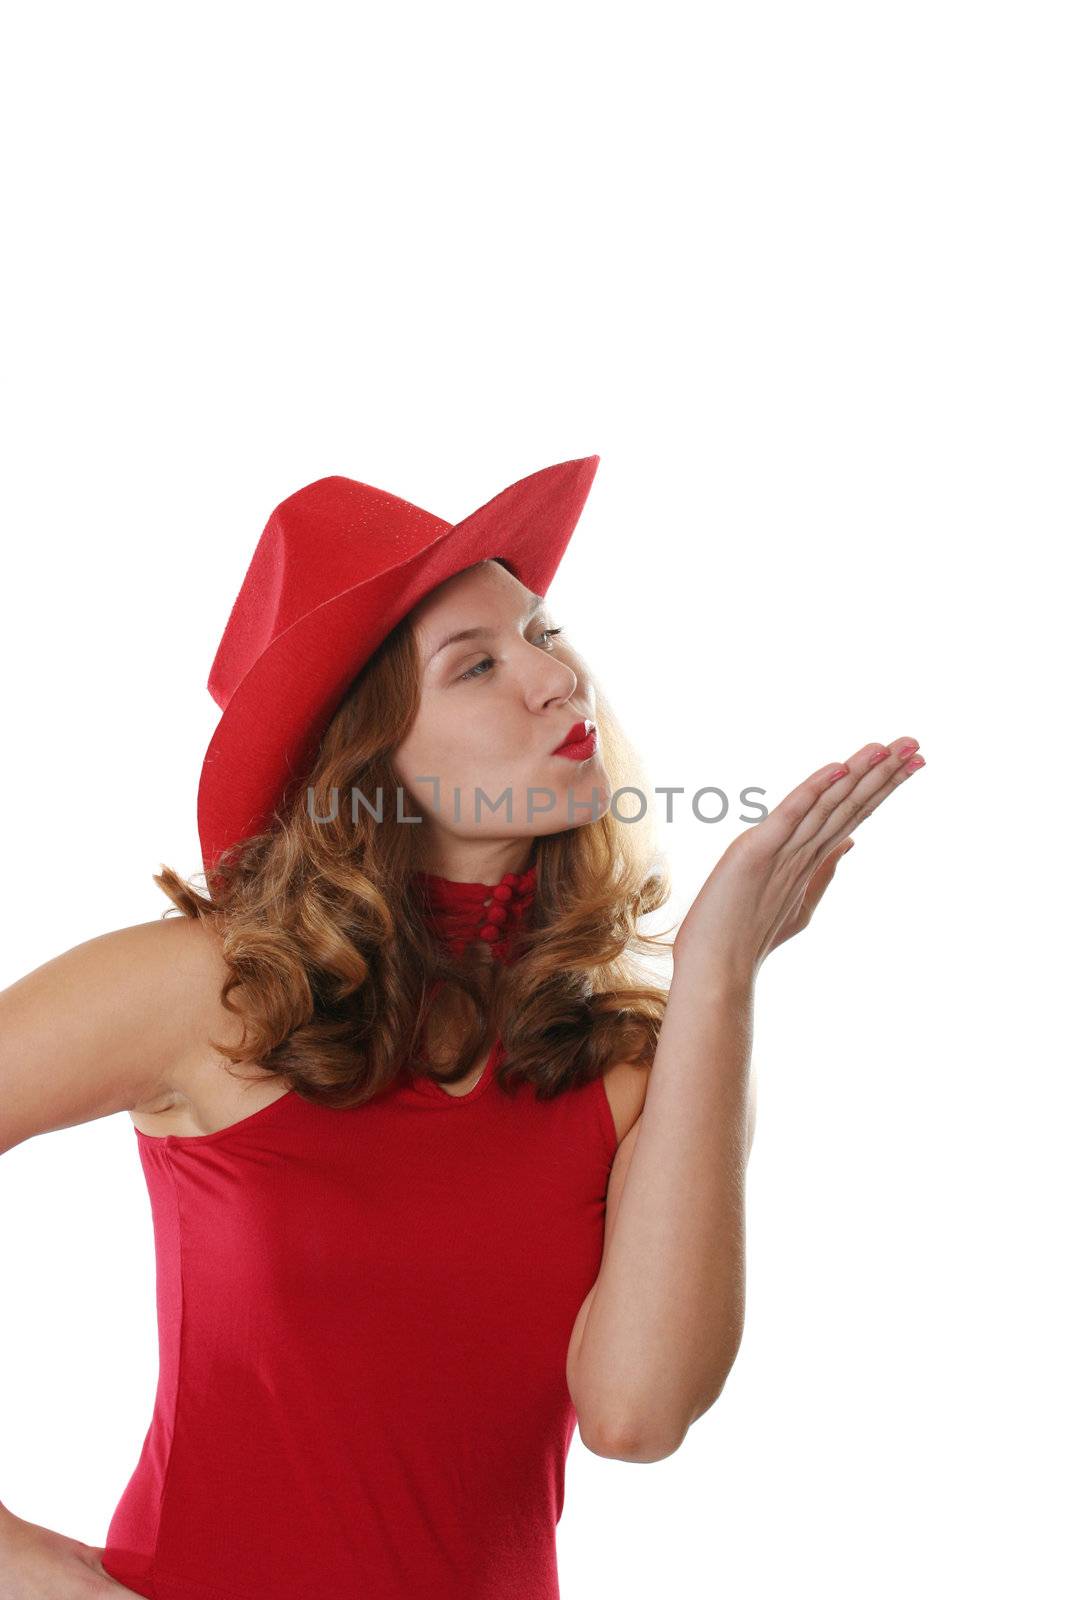 The girl in a red dress and a hat gives an air kiss